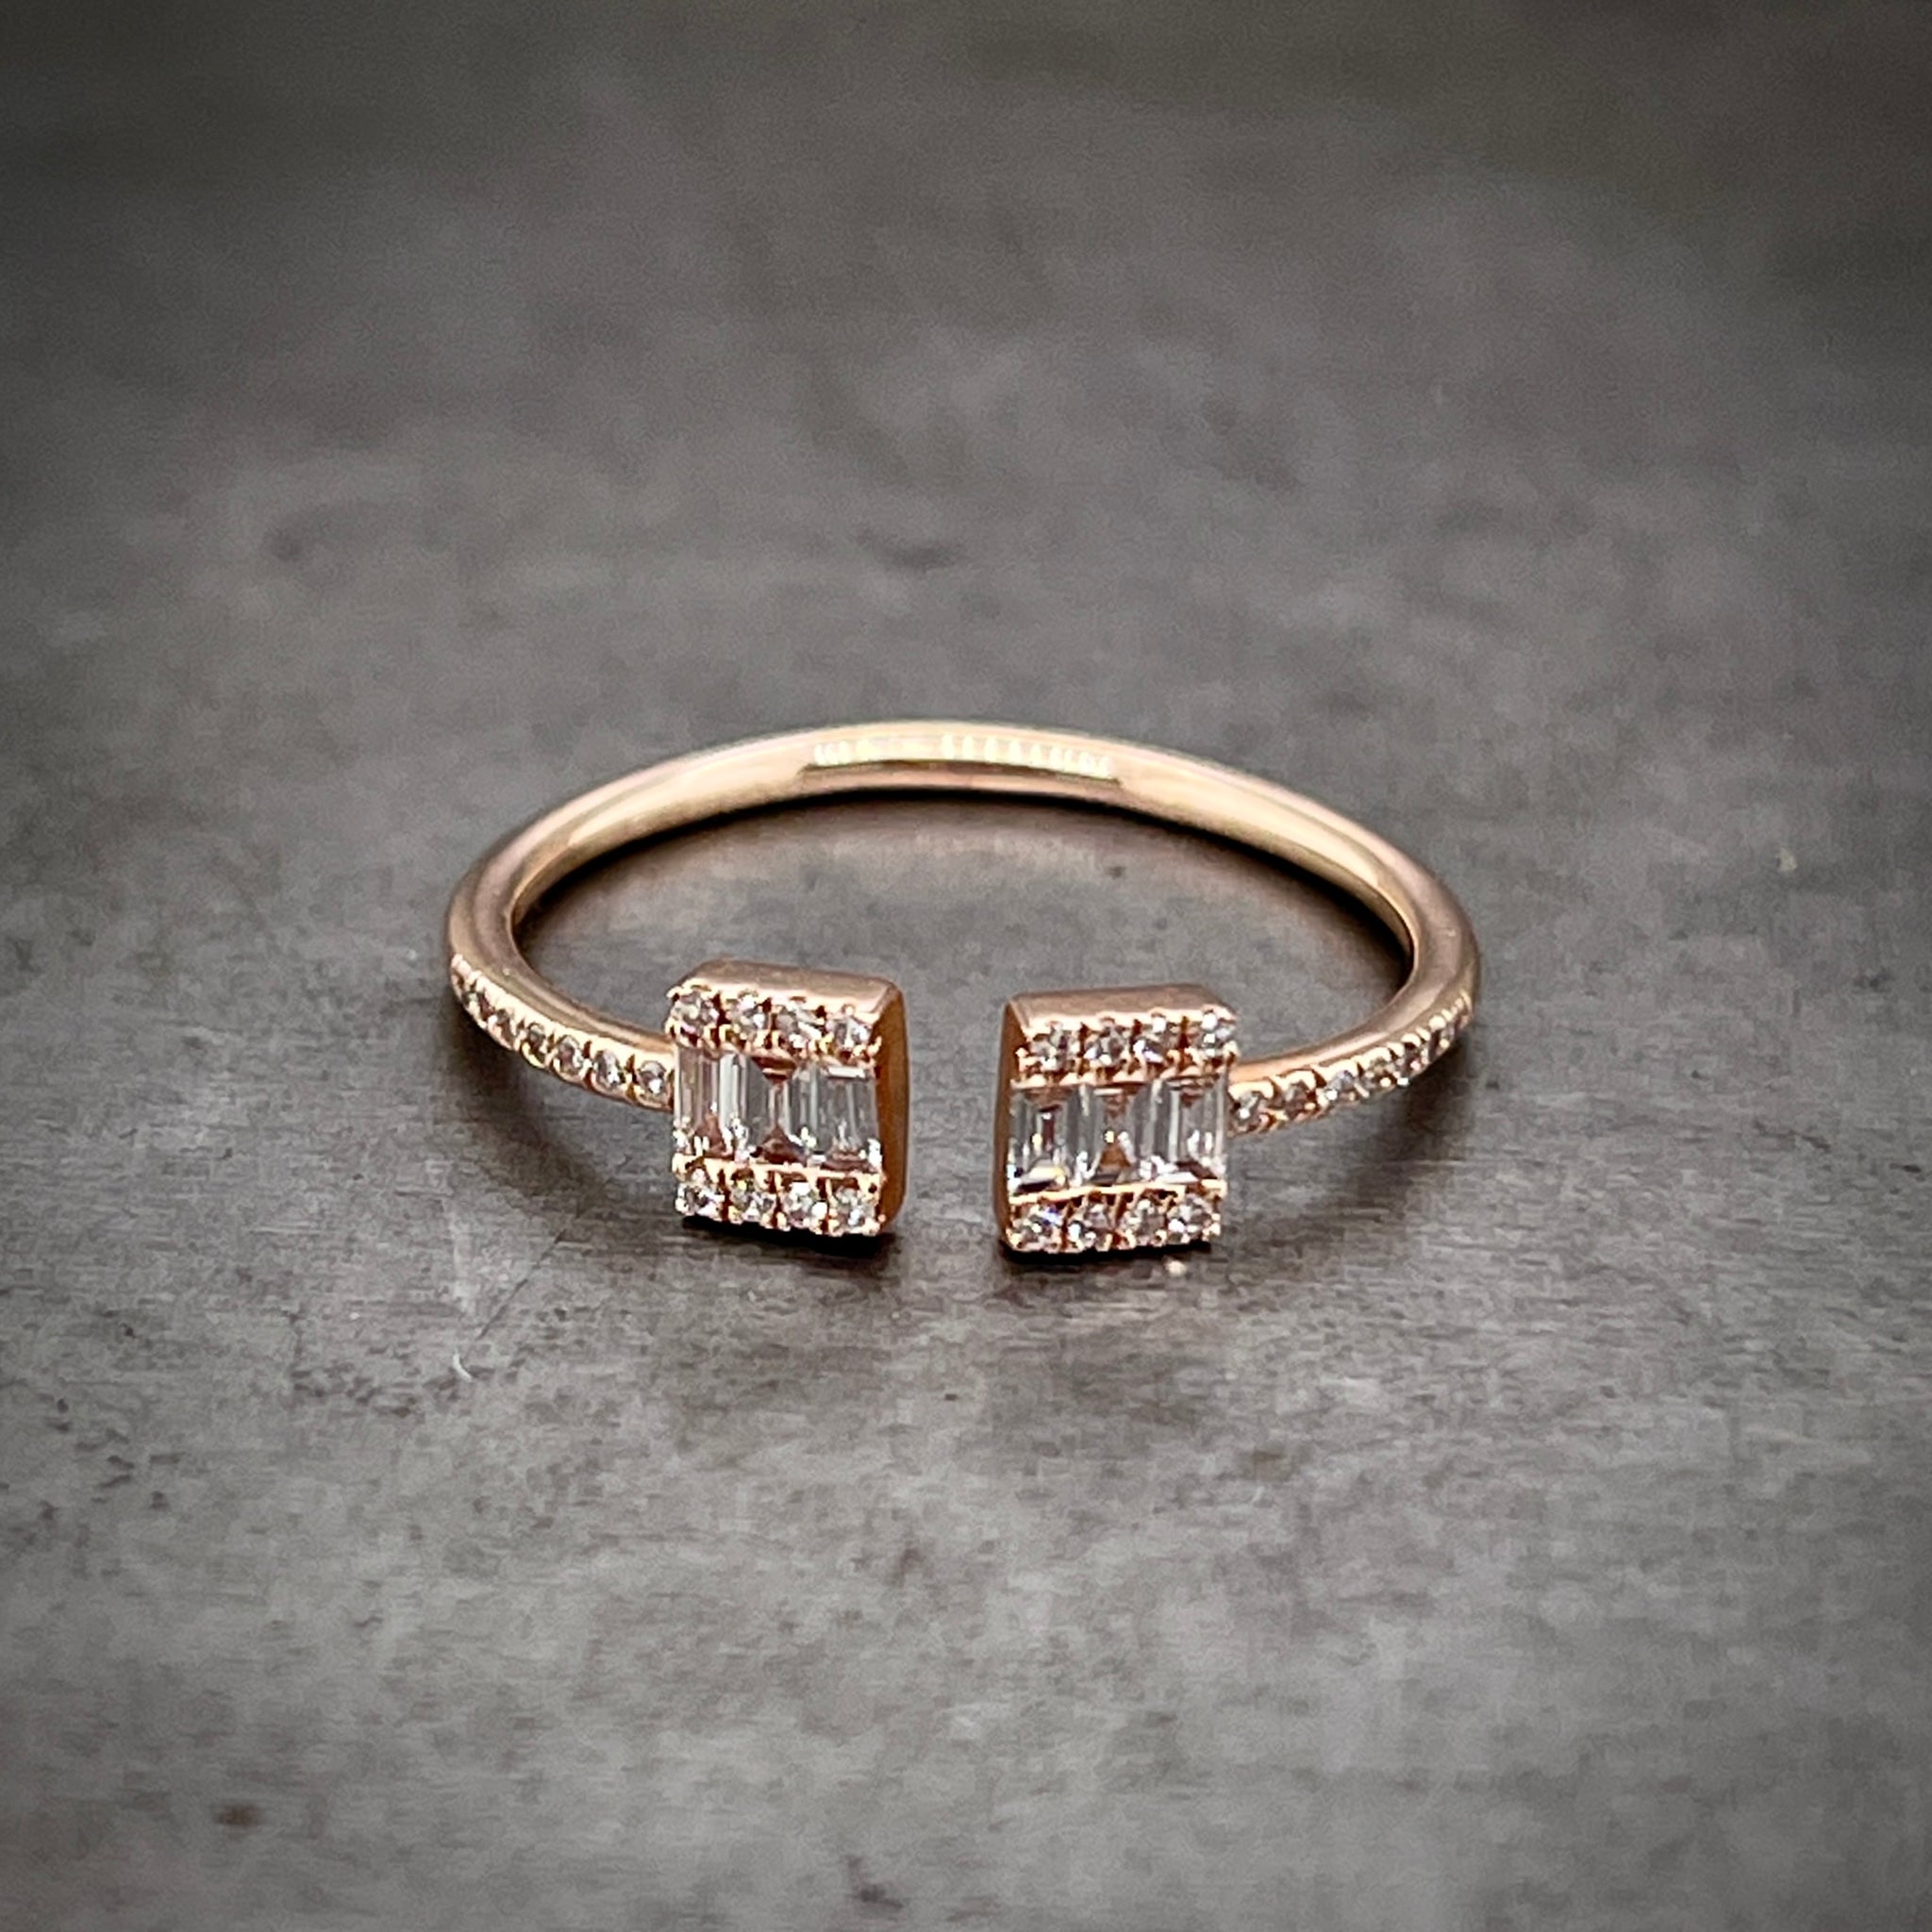 Frontal aerial view of negative space diamond ring. This ring is made from 14 karat rose gold and features round brilliant diamonds on its shoulders. The center of the ring features two rectangle that do not touch one another leaving an open space. The rectangles feature three baguette diamonds in the center and then 4 round diamonds that flank its northern and southern girdles.